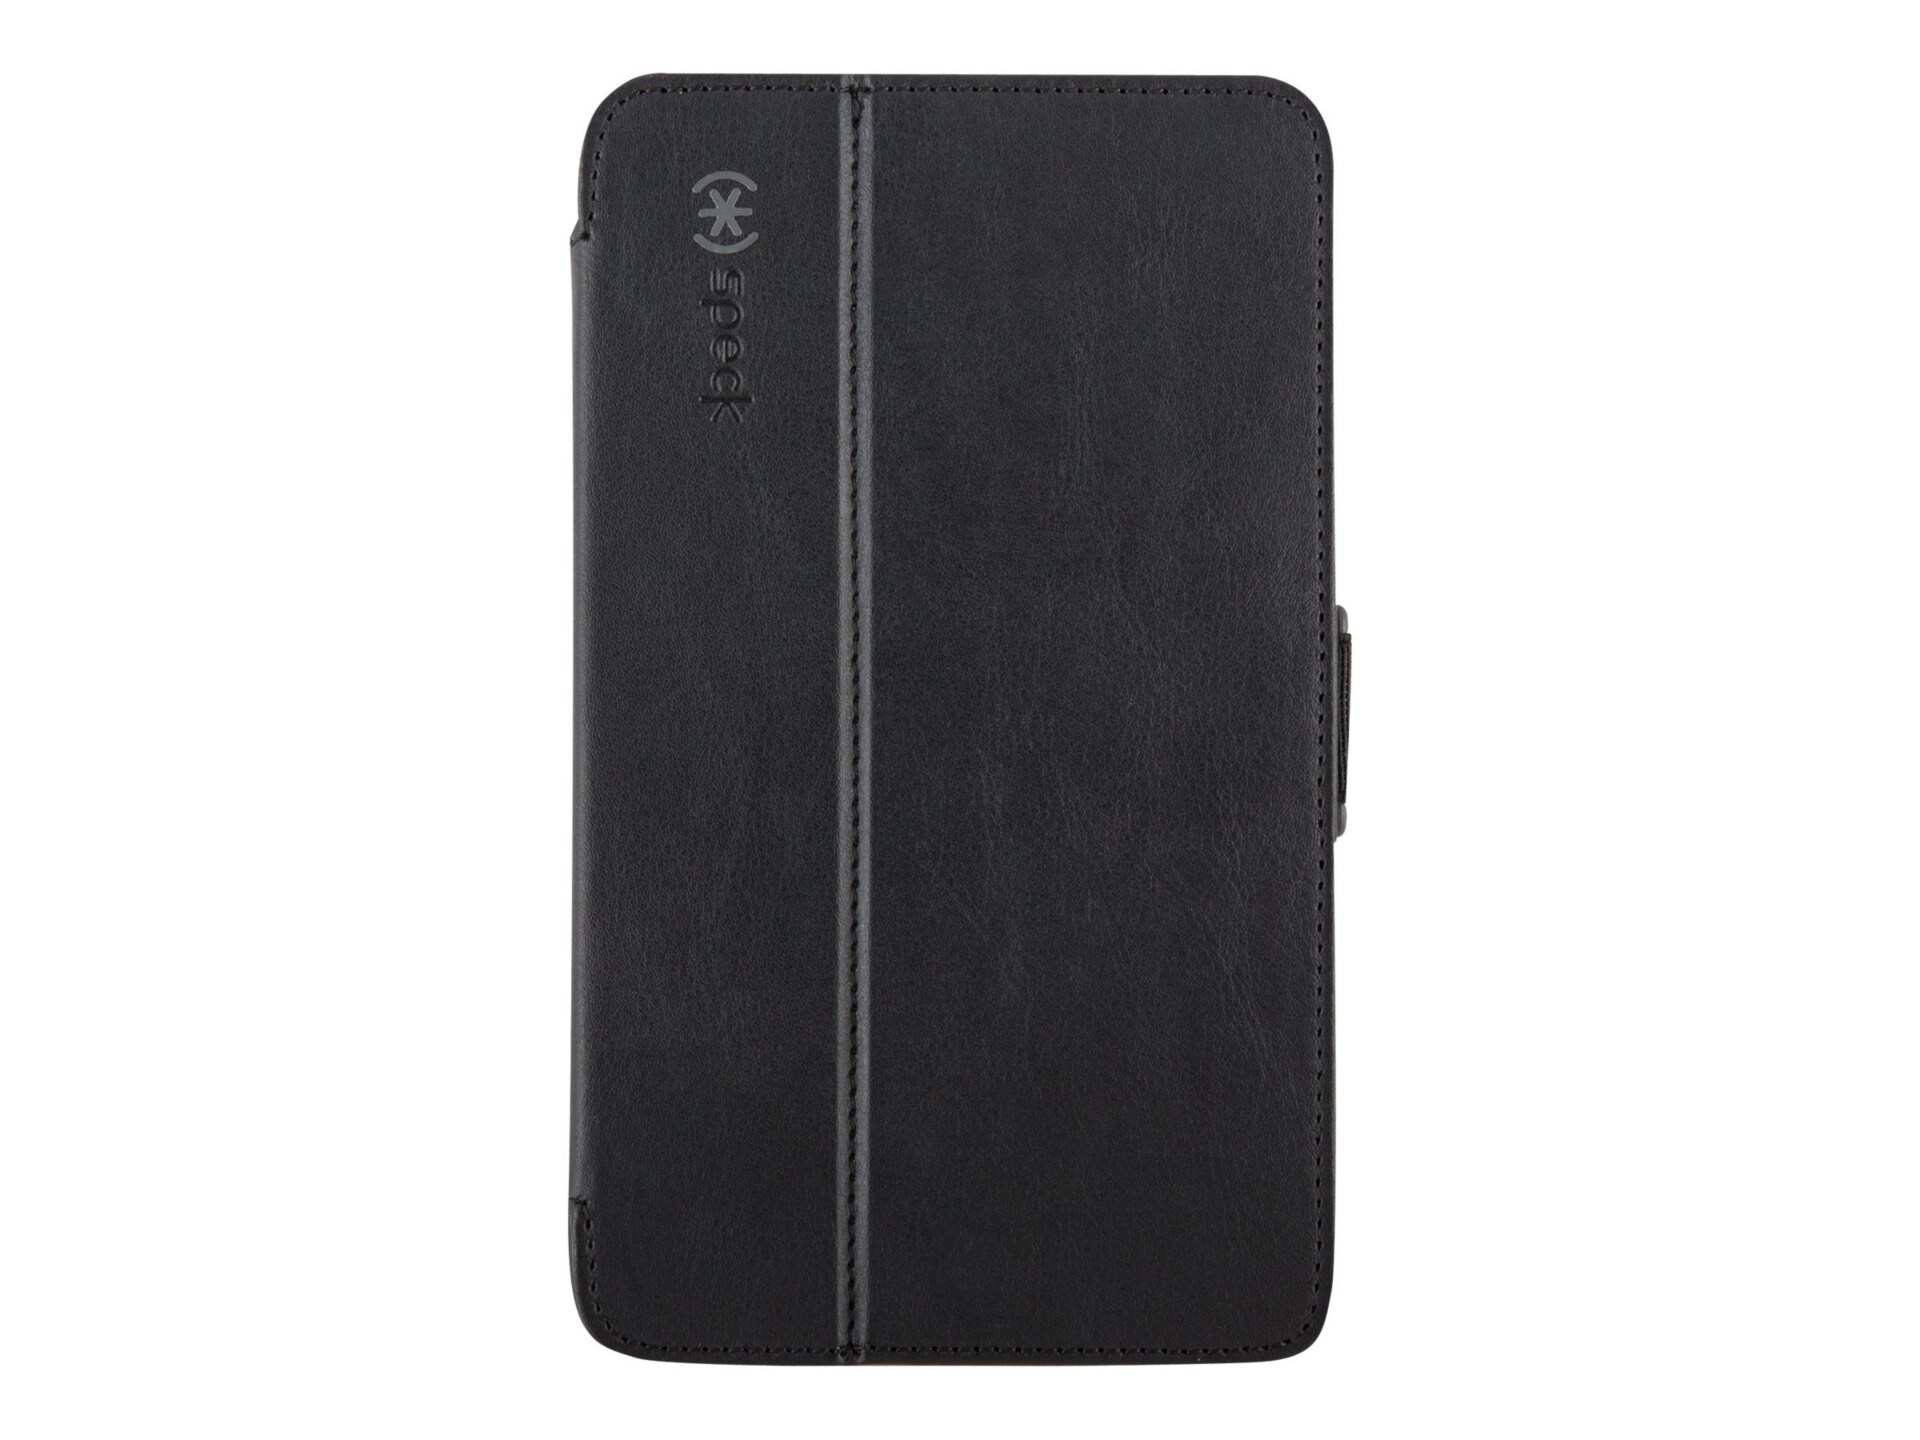 Speck StyleFolio Galaxy Tab 4 (7") - protective case for tablet